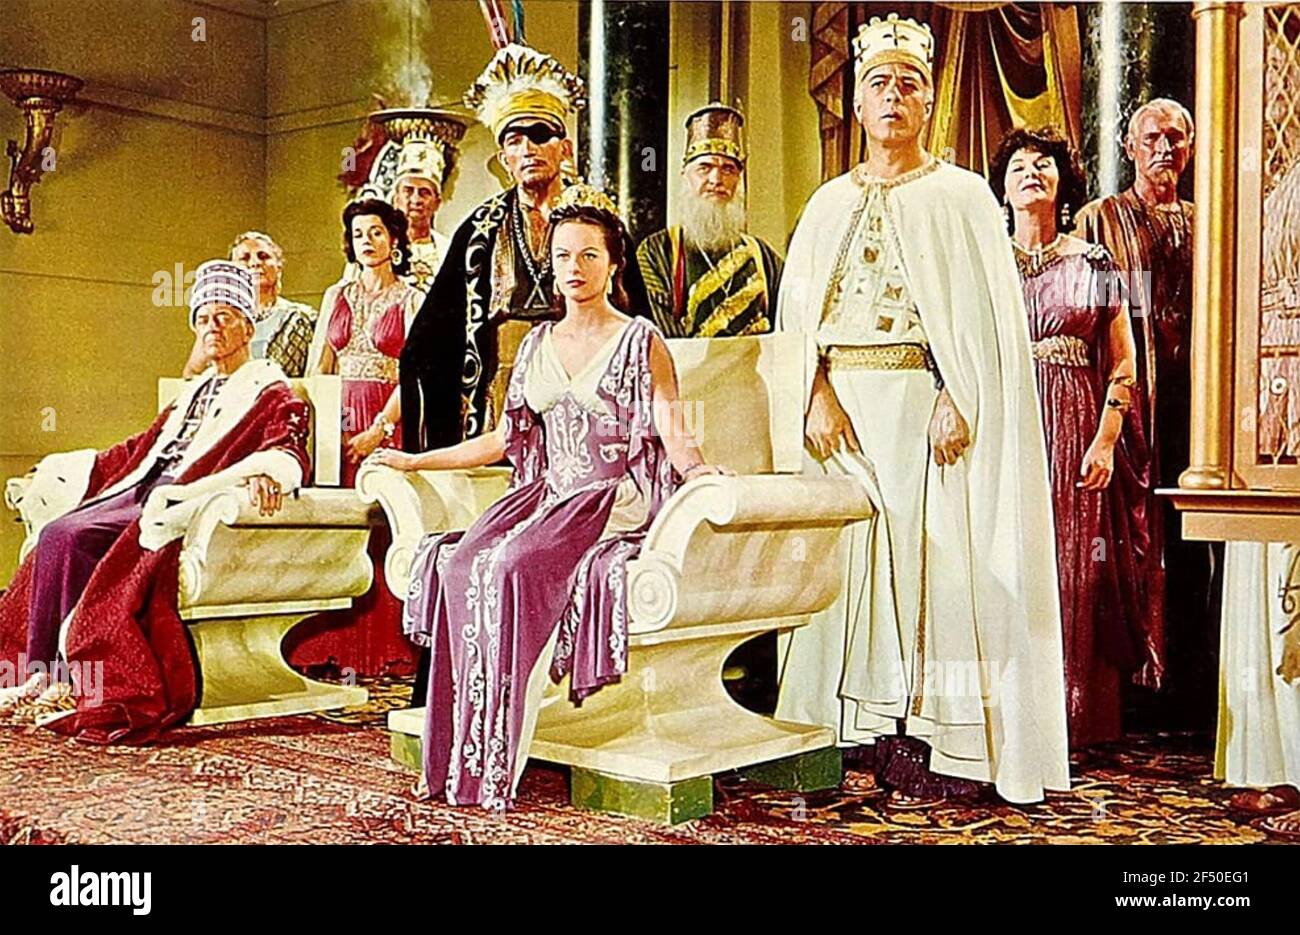 ATLANTIS THE LOST CONTINENT 1961 MGM film with Joyce Taylor as Princess Antillia and Edward Platt as the High Priest both seated Stock Photo